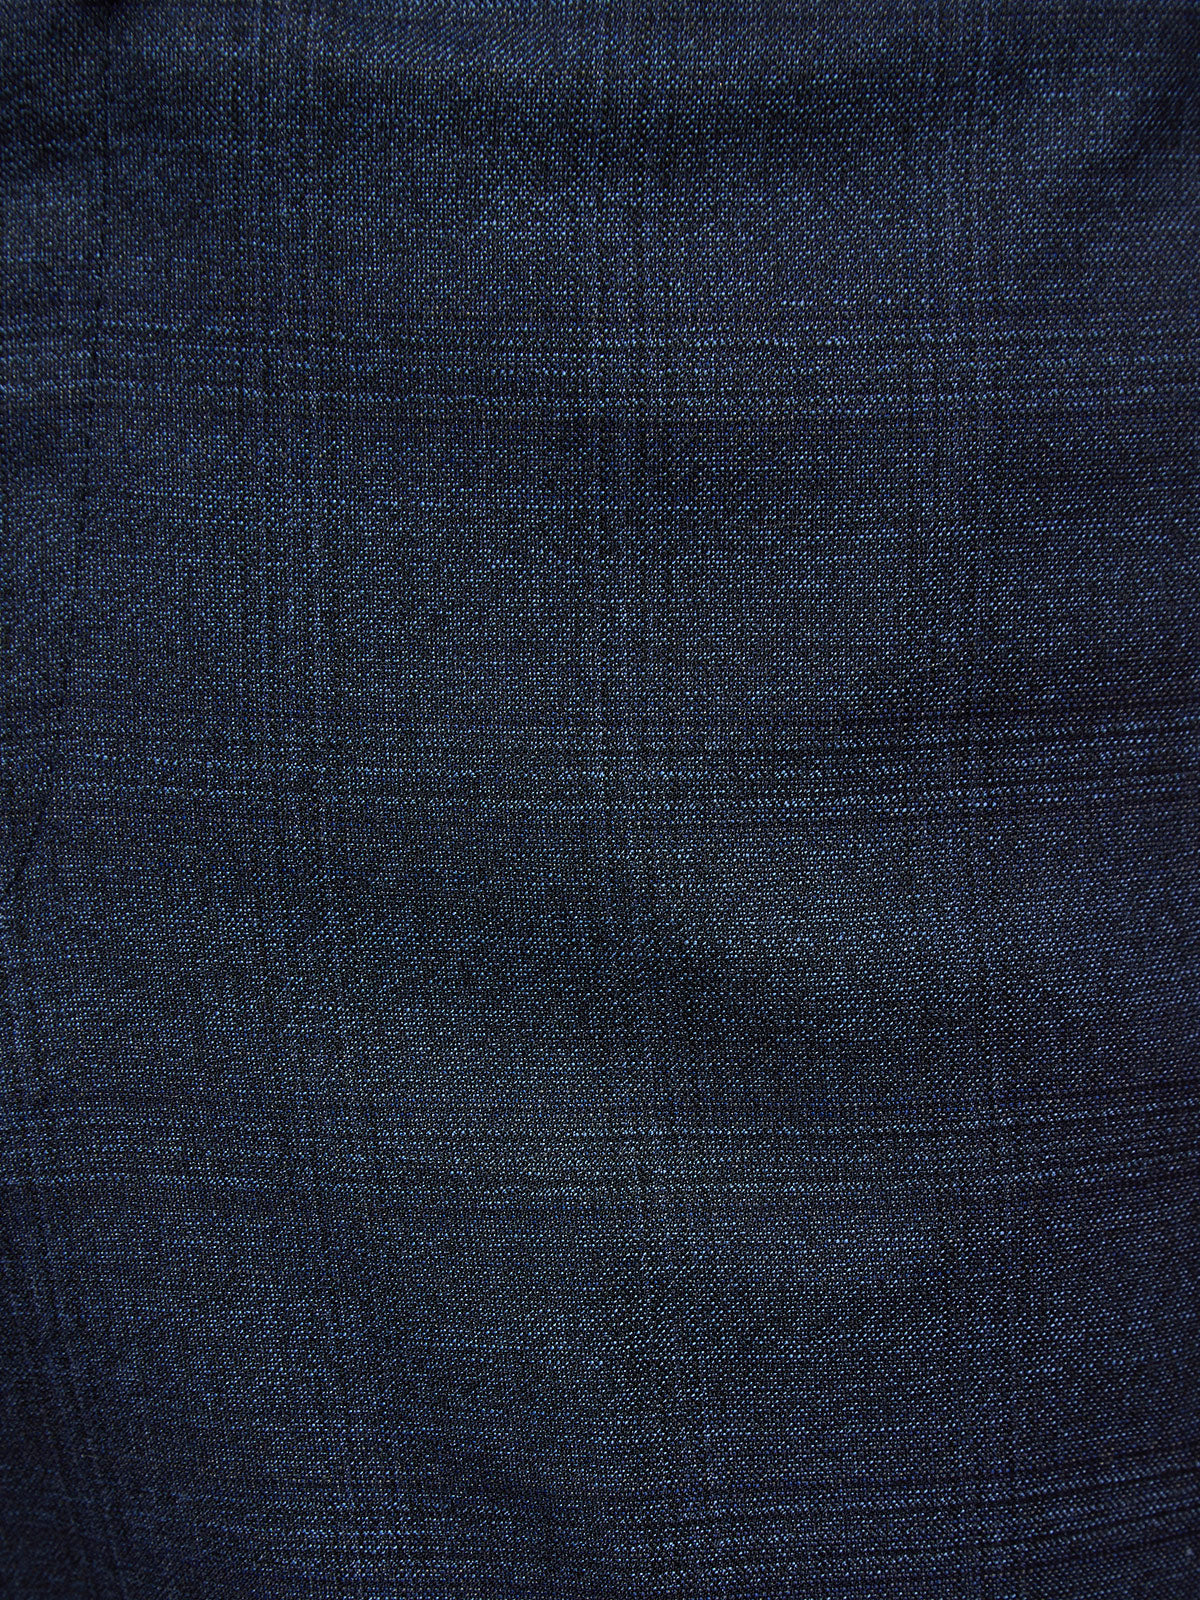 HOPKINS WOOL CHECK SUIT TROUSERS